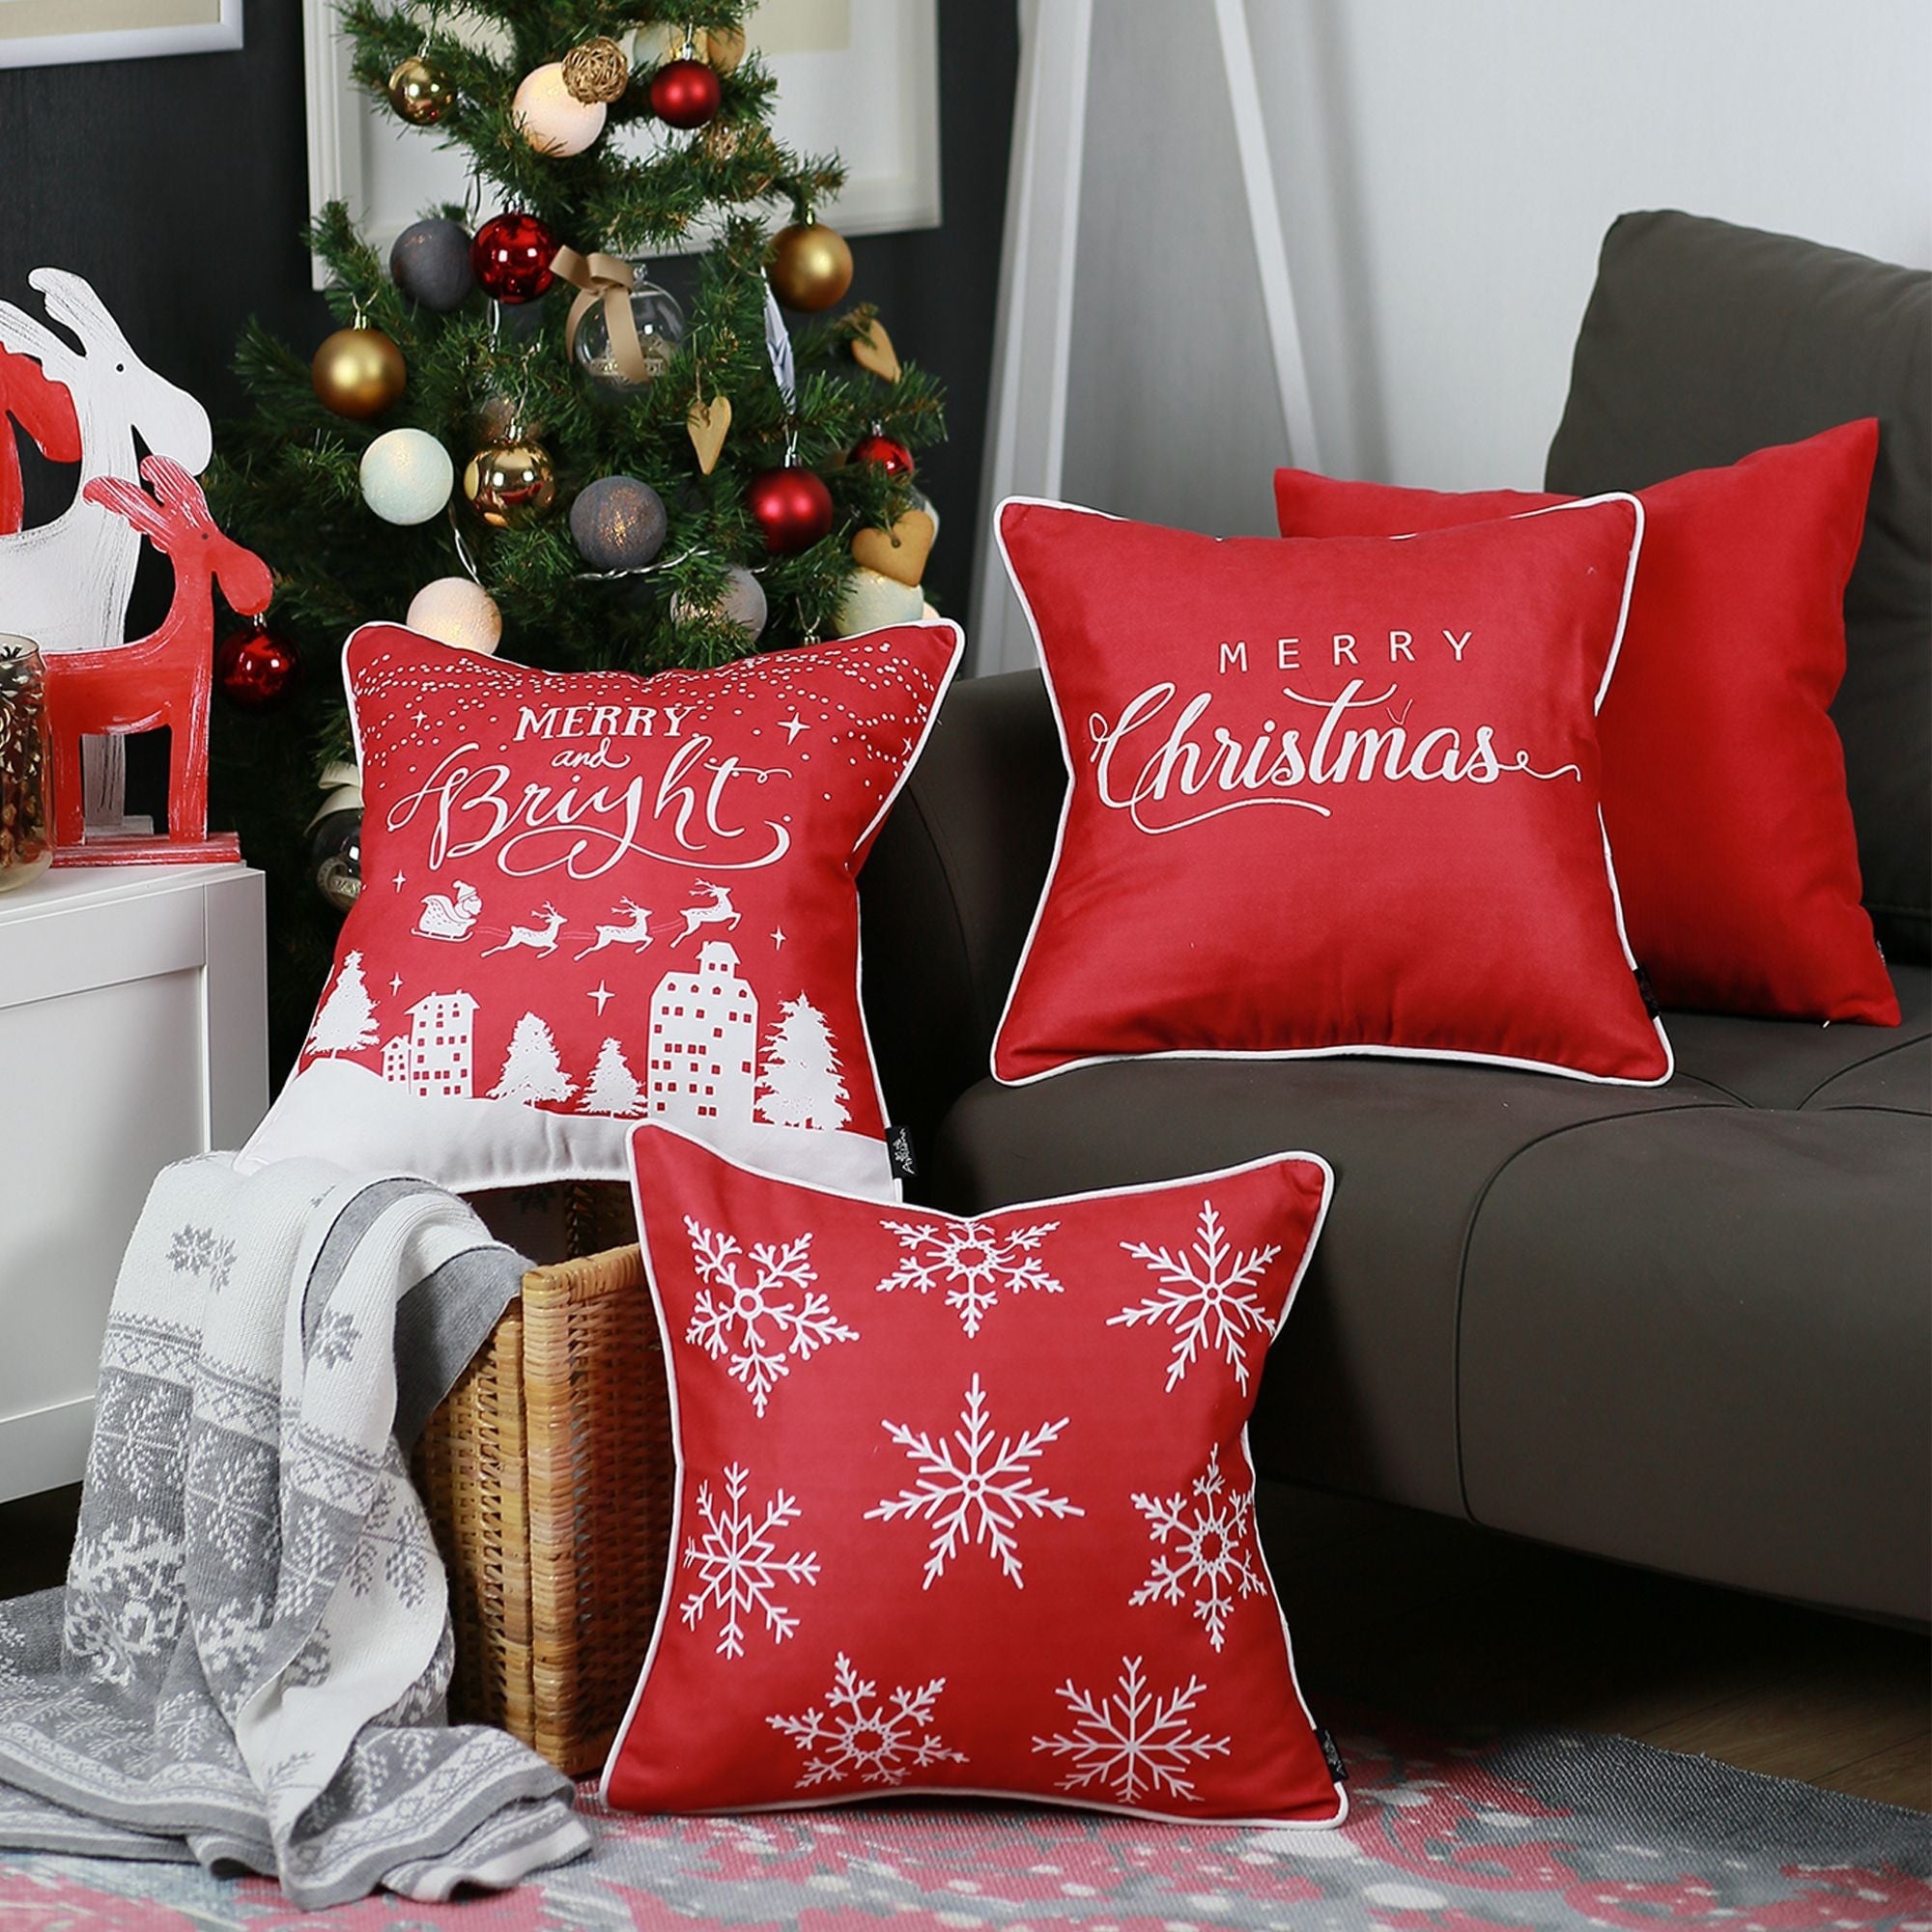 https://ak1.ostkcdn.com/images/products/is/images/direct/e5590bde9dca260ed267af19d89fe98e472fe214/Christmas-Throw-Pillow-Covers-%26-Insert-%28Set-of-4%29.jpg